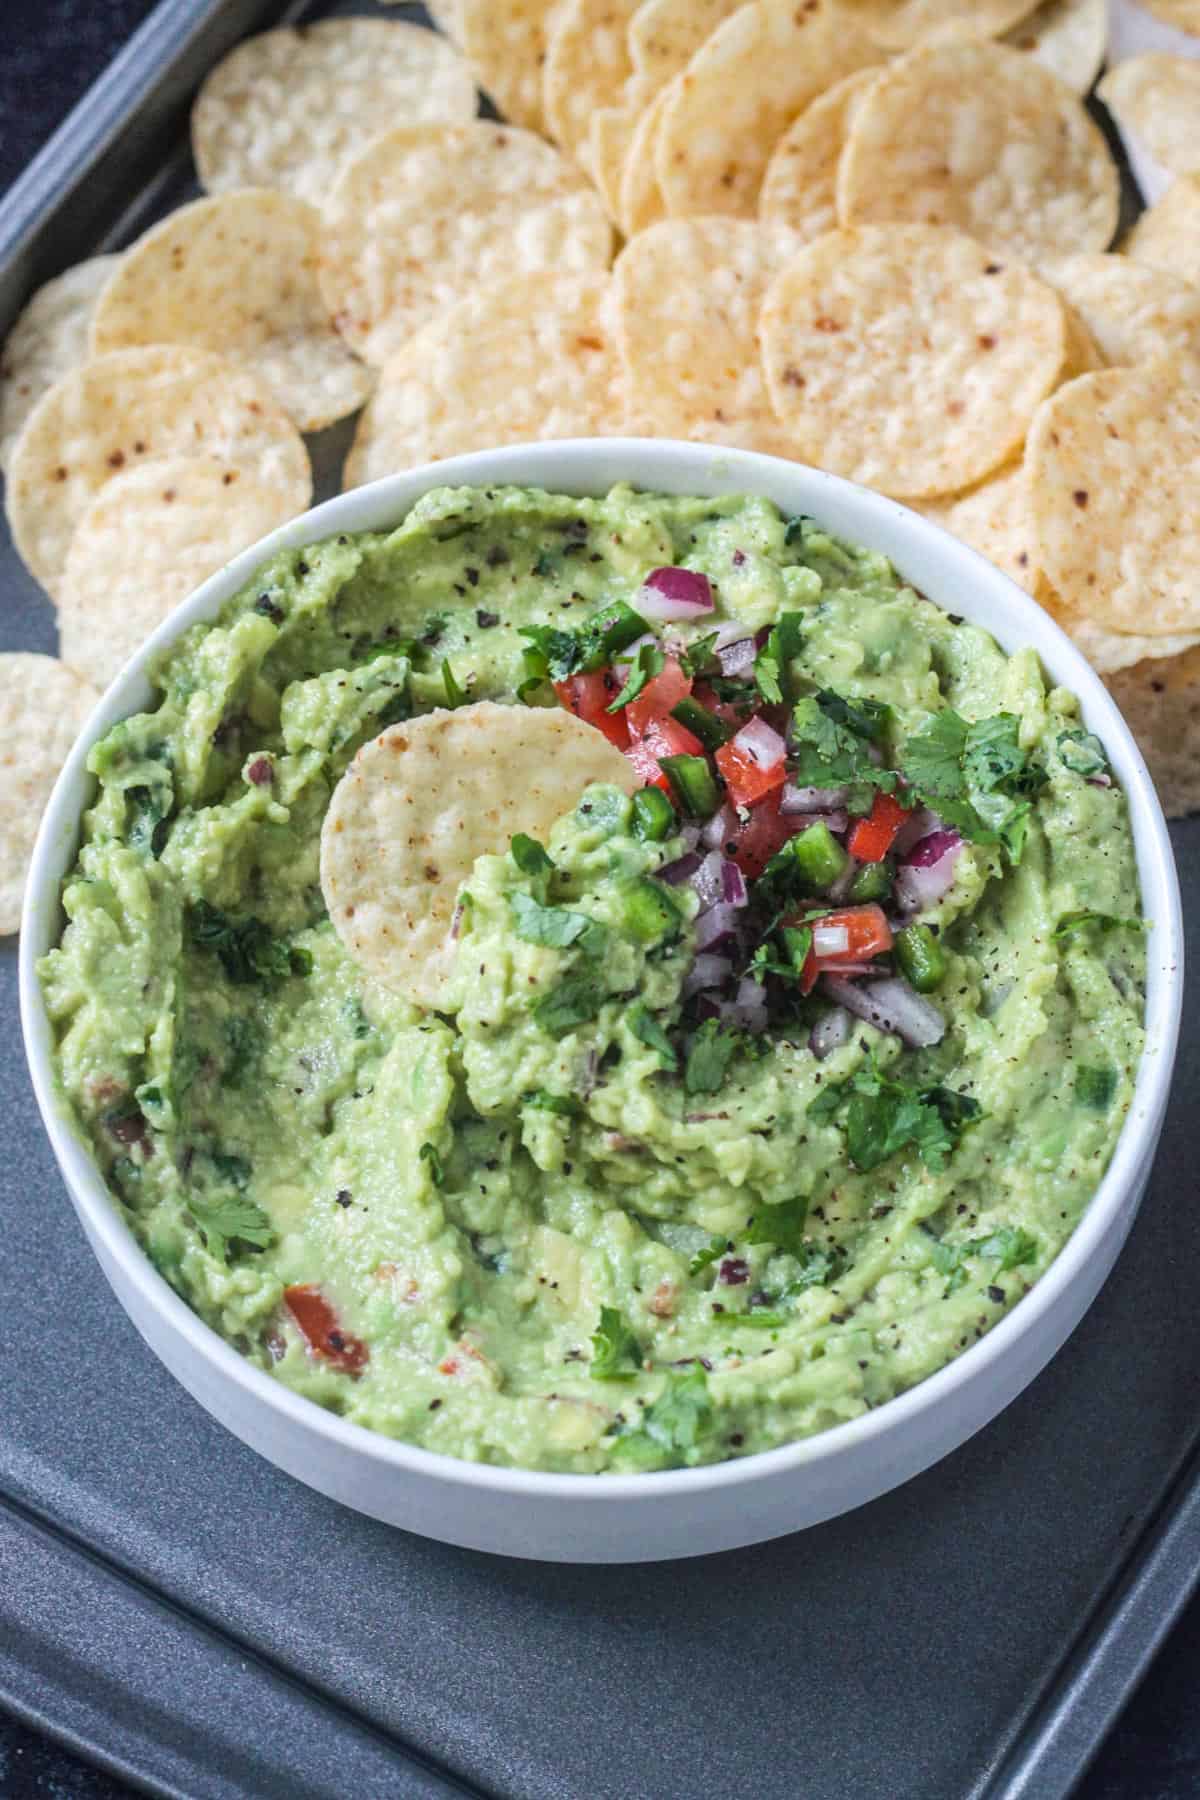 One tortilla chip dipped in a bowl of guacamole.